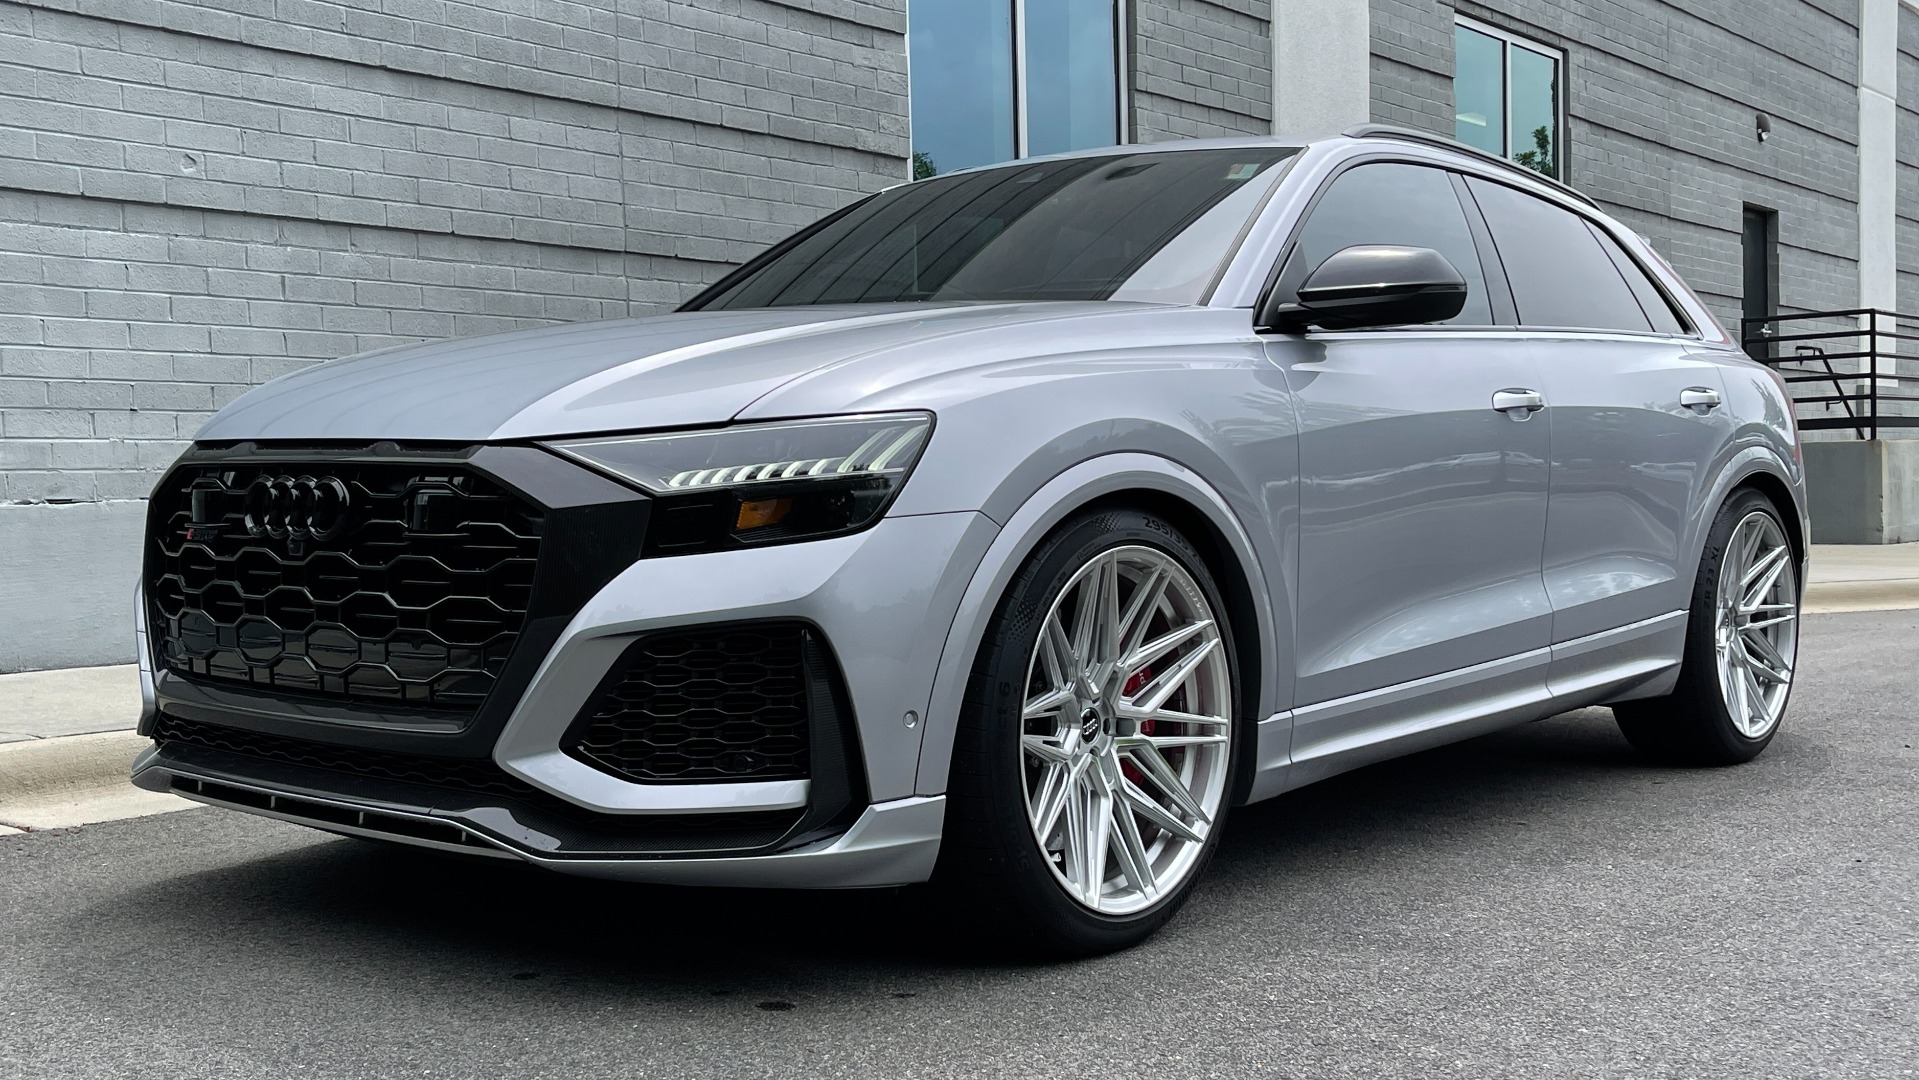 Used 2021 Audi RS Q8 4.0 TFSA QUATTRO / LUX / EXEC / CARBON & BLACK OPTIC / DRVR ASST / TOWING for sale $139,999 at Formula Imports in Charlotte NC 28227 5